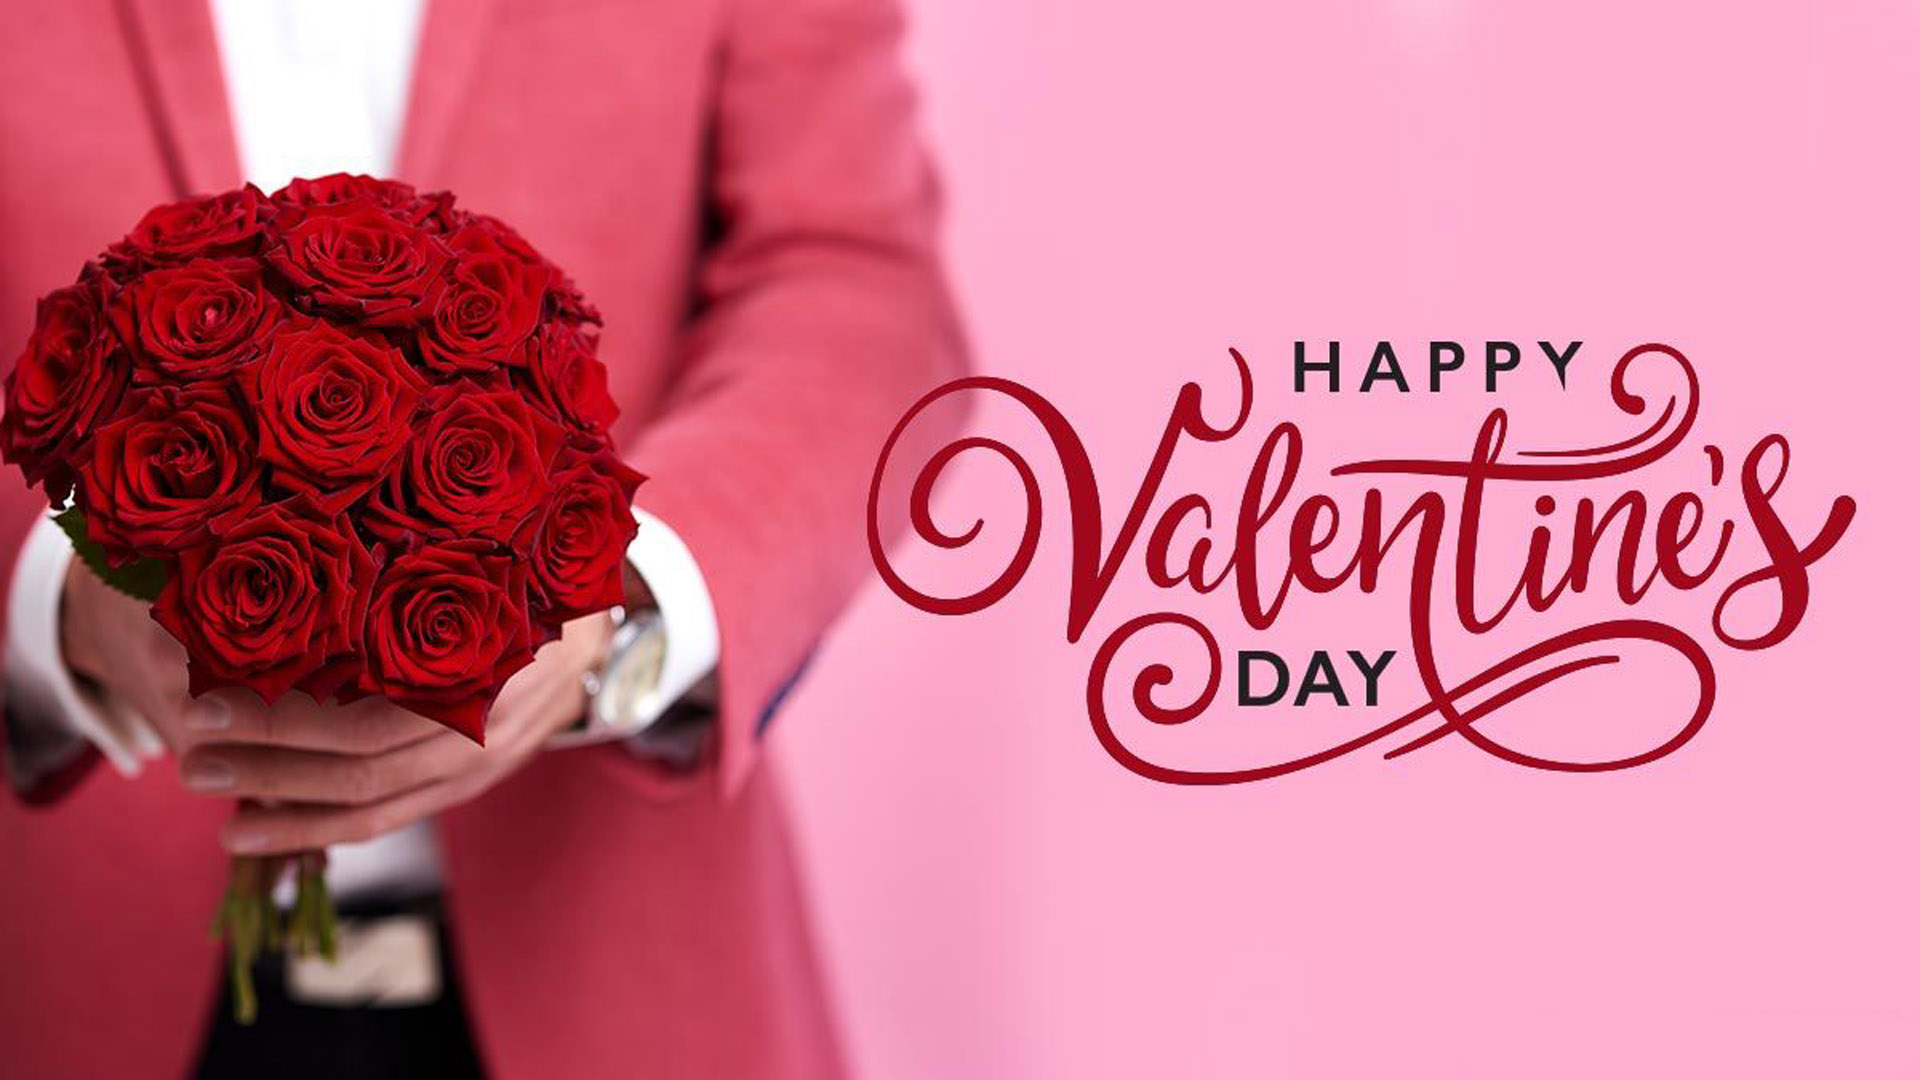 Happy Valentines Day Quotes wishes images messages to your loved ones